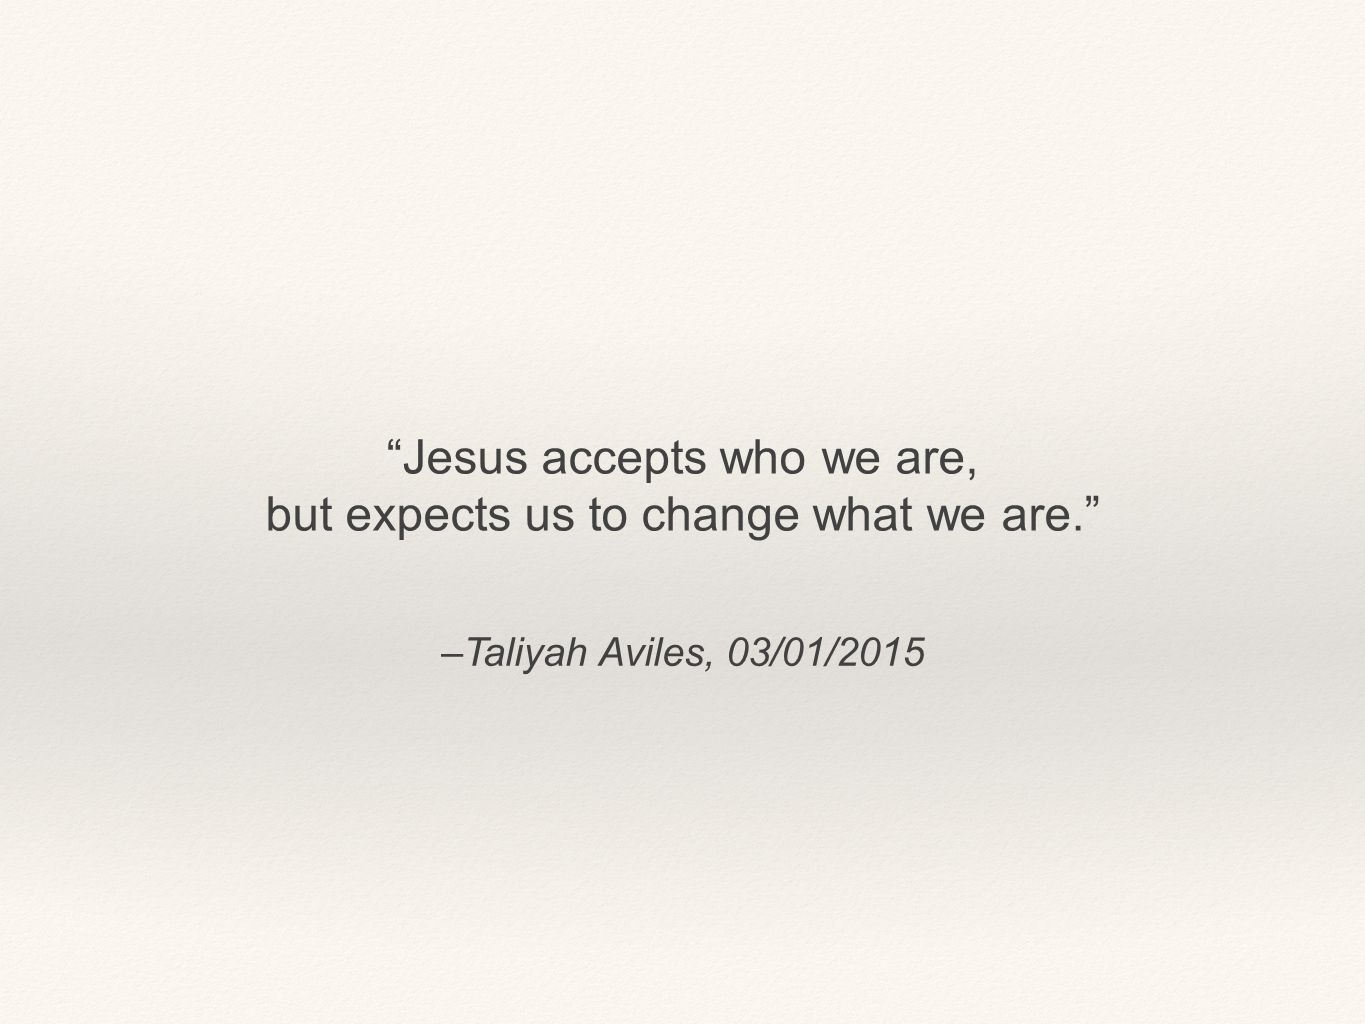 Jesus accepts who we are, but expects us to change what we are.